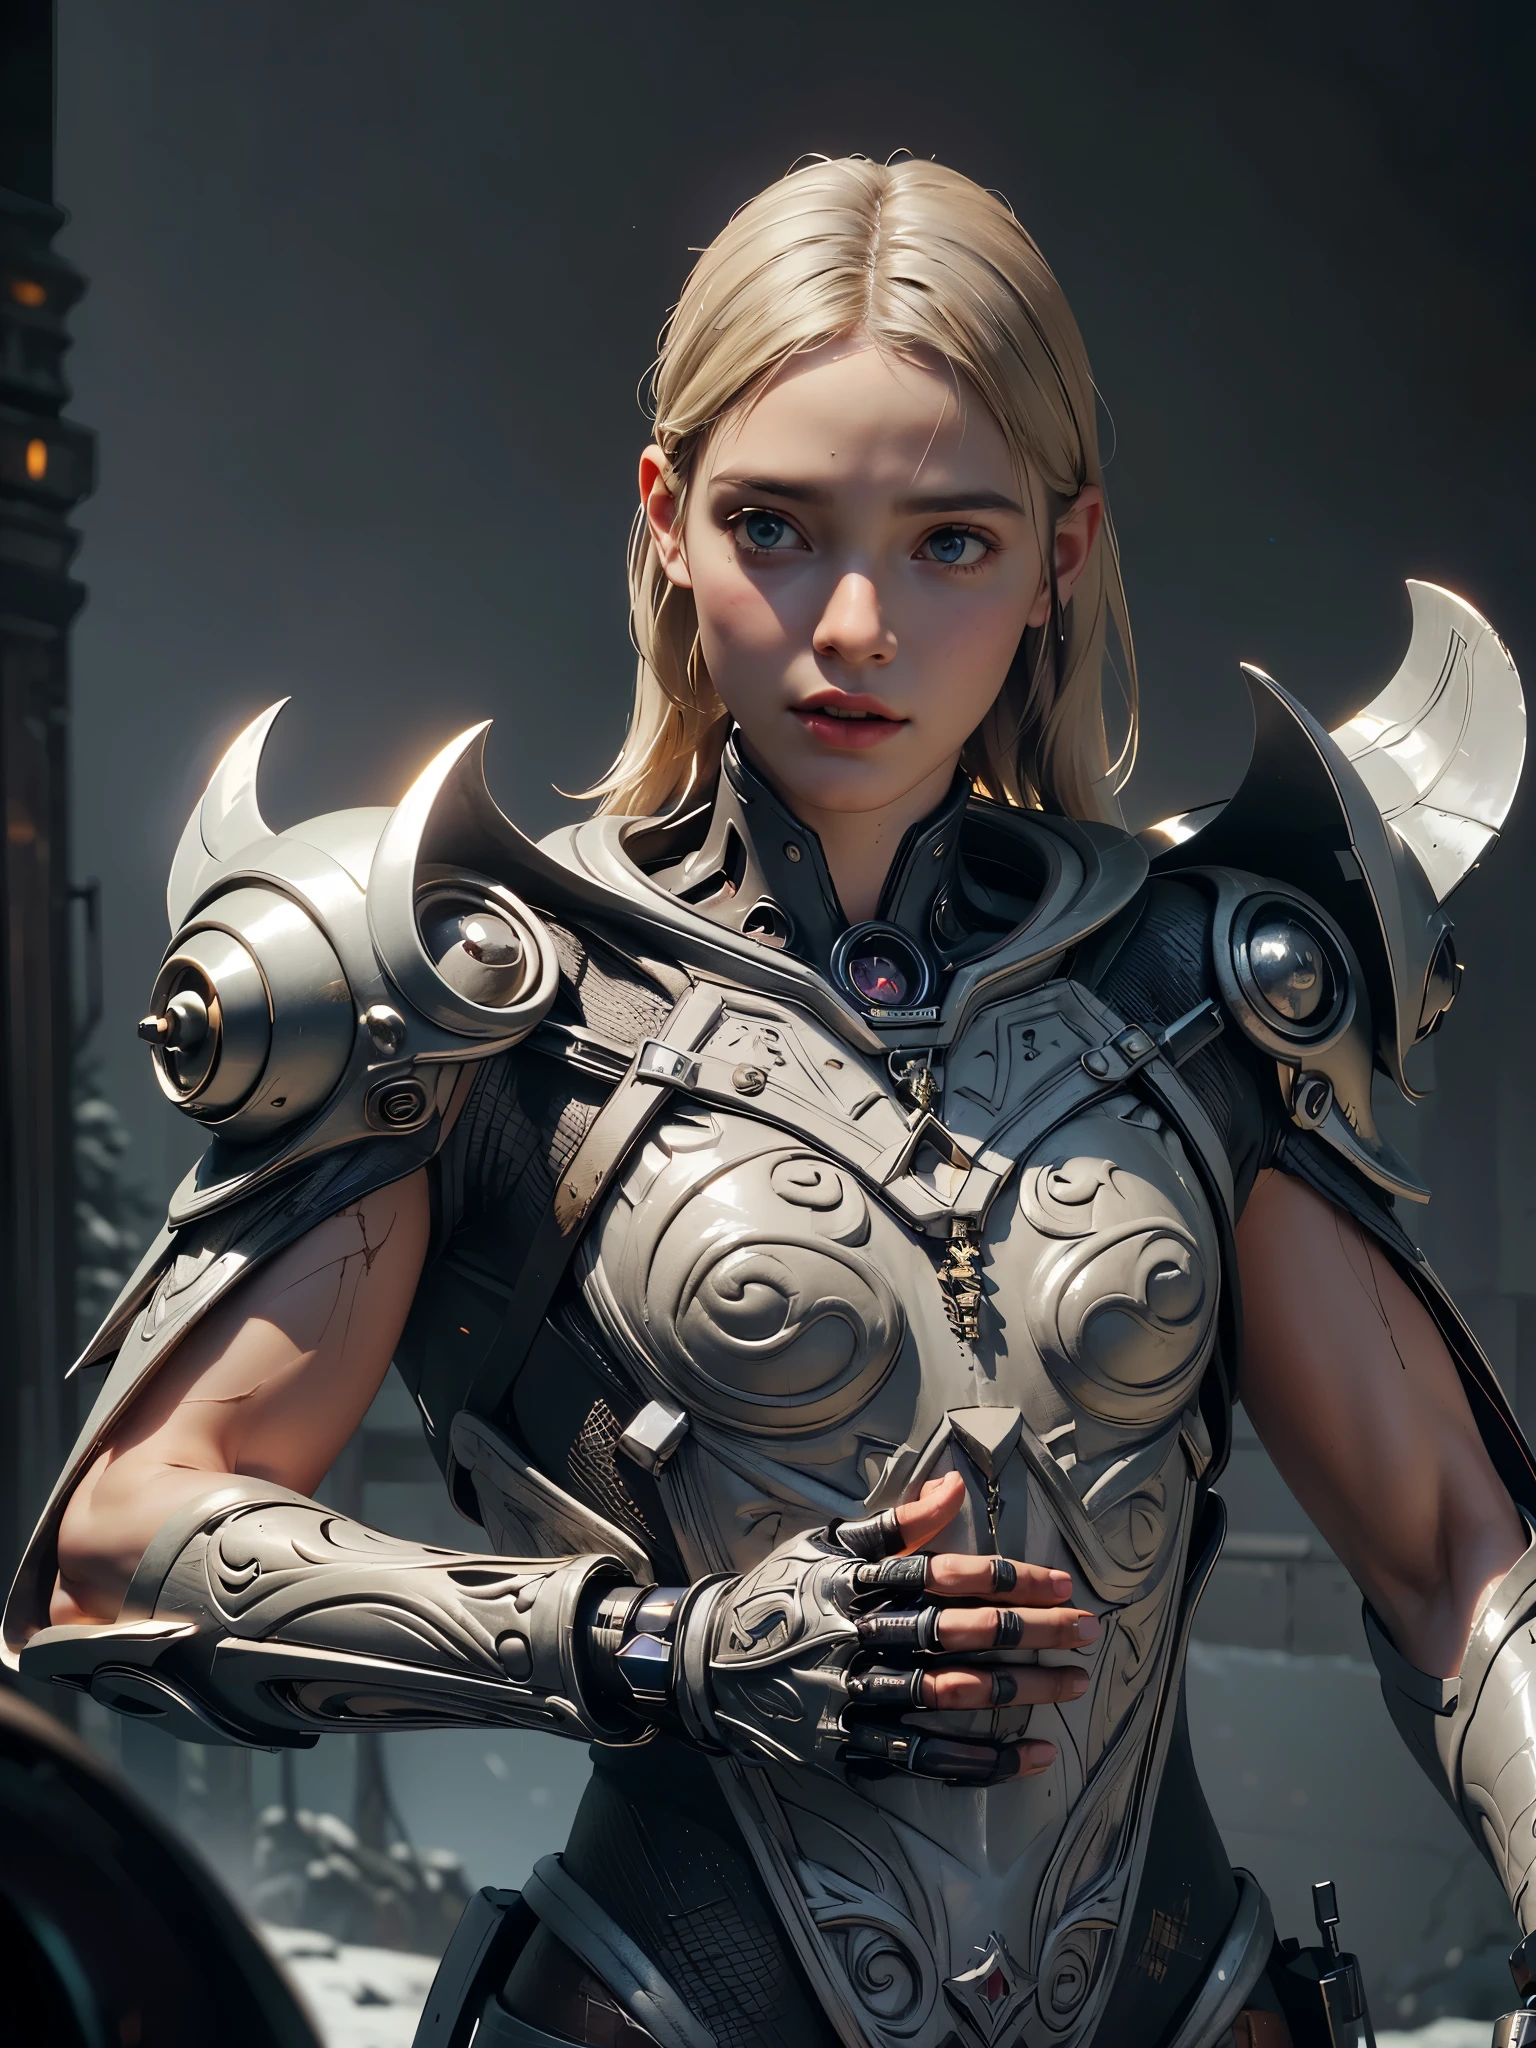 ((Remove extra finger, complete the texture of the armor)). blonde woman in armor with horns and sword in a dark setting, girl in knight&#39;s armor, picture of a female paladin, gorgeous female paladin, unrealistic rendering on the engine + goddess, Imogen Poots as D&d paladin, Unreal engine&#39;, Unreal character engine, Imogen Poots as Paladin, made on Unreal Engine 5